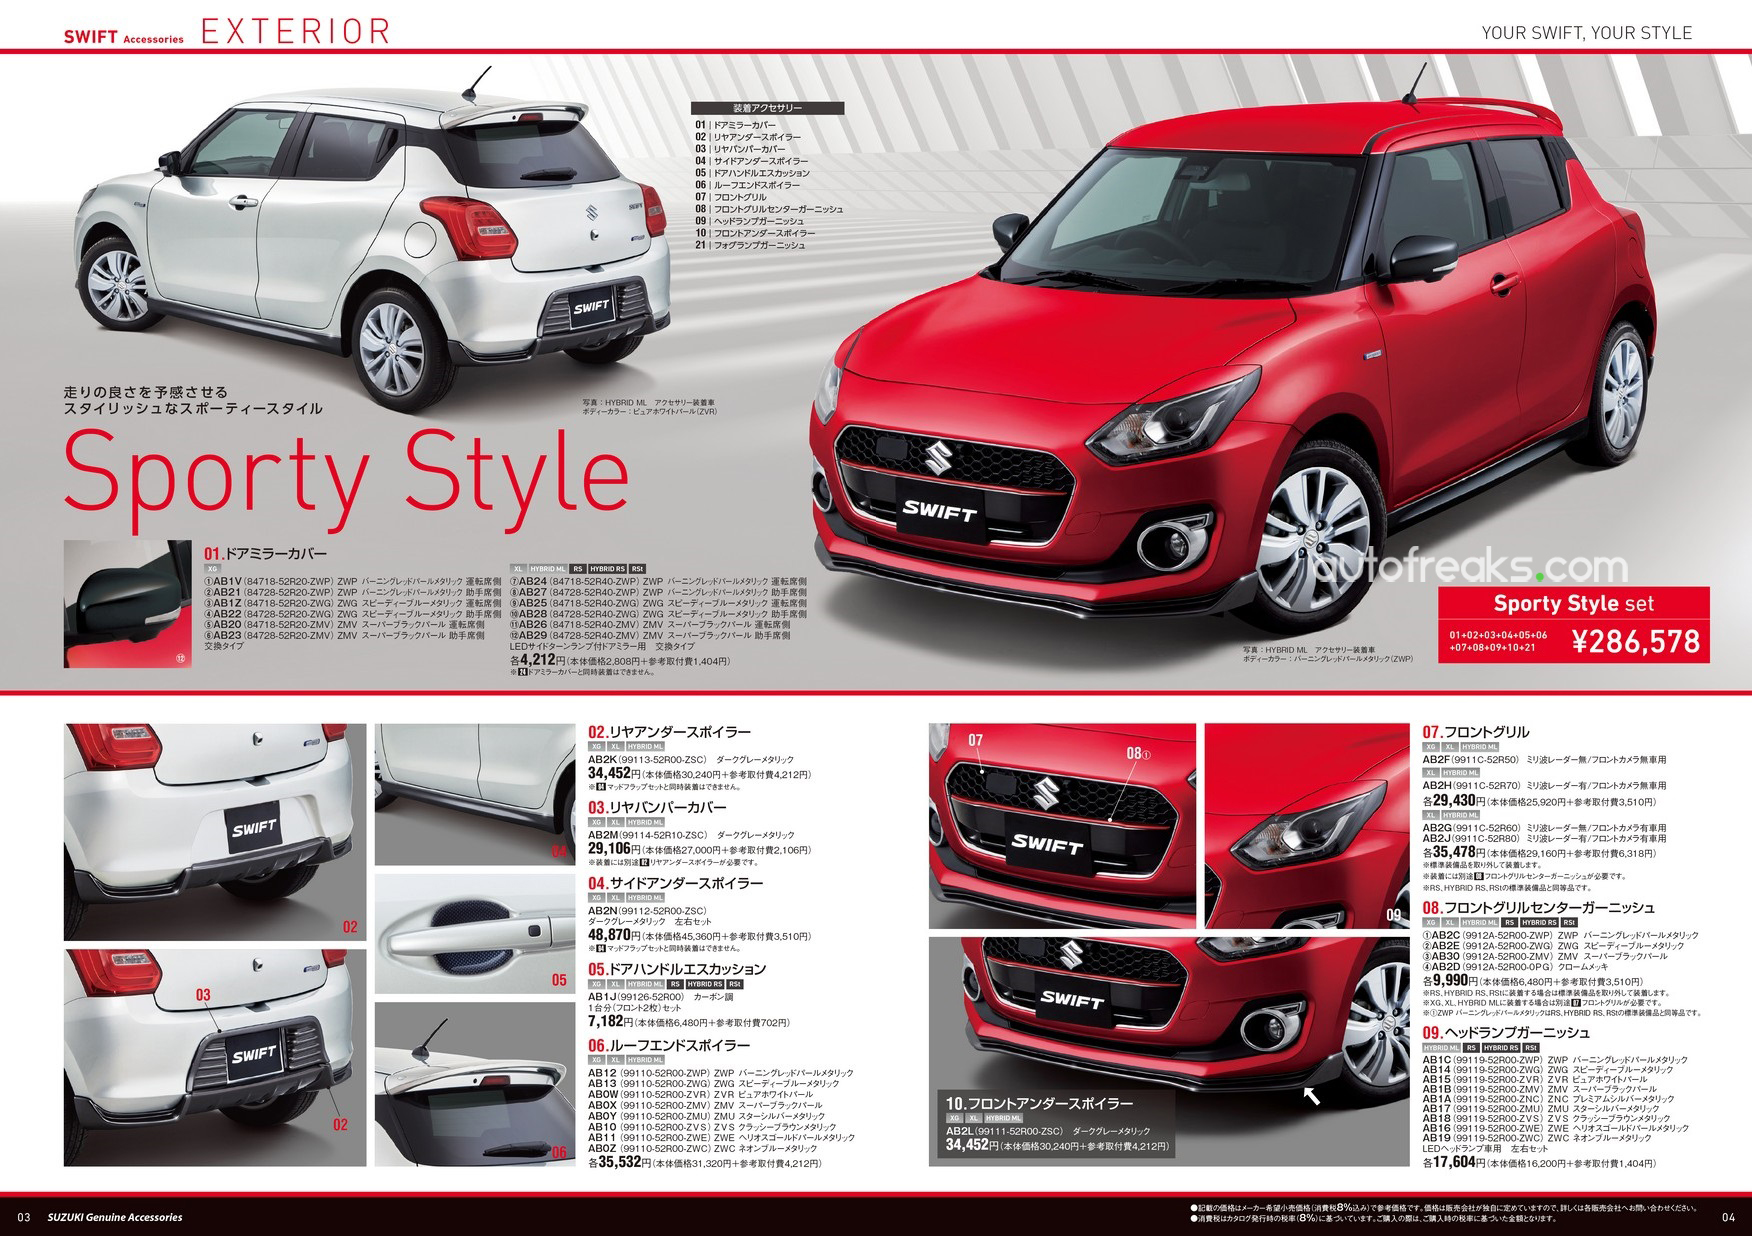 New 2017 Suzuki Swift Price, Features & Images: All you need to